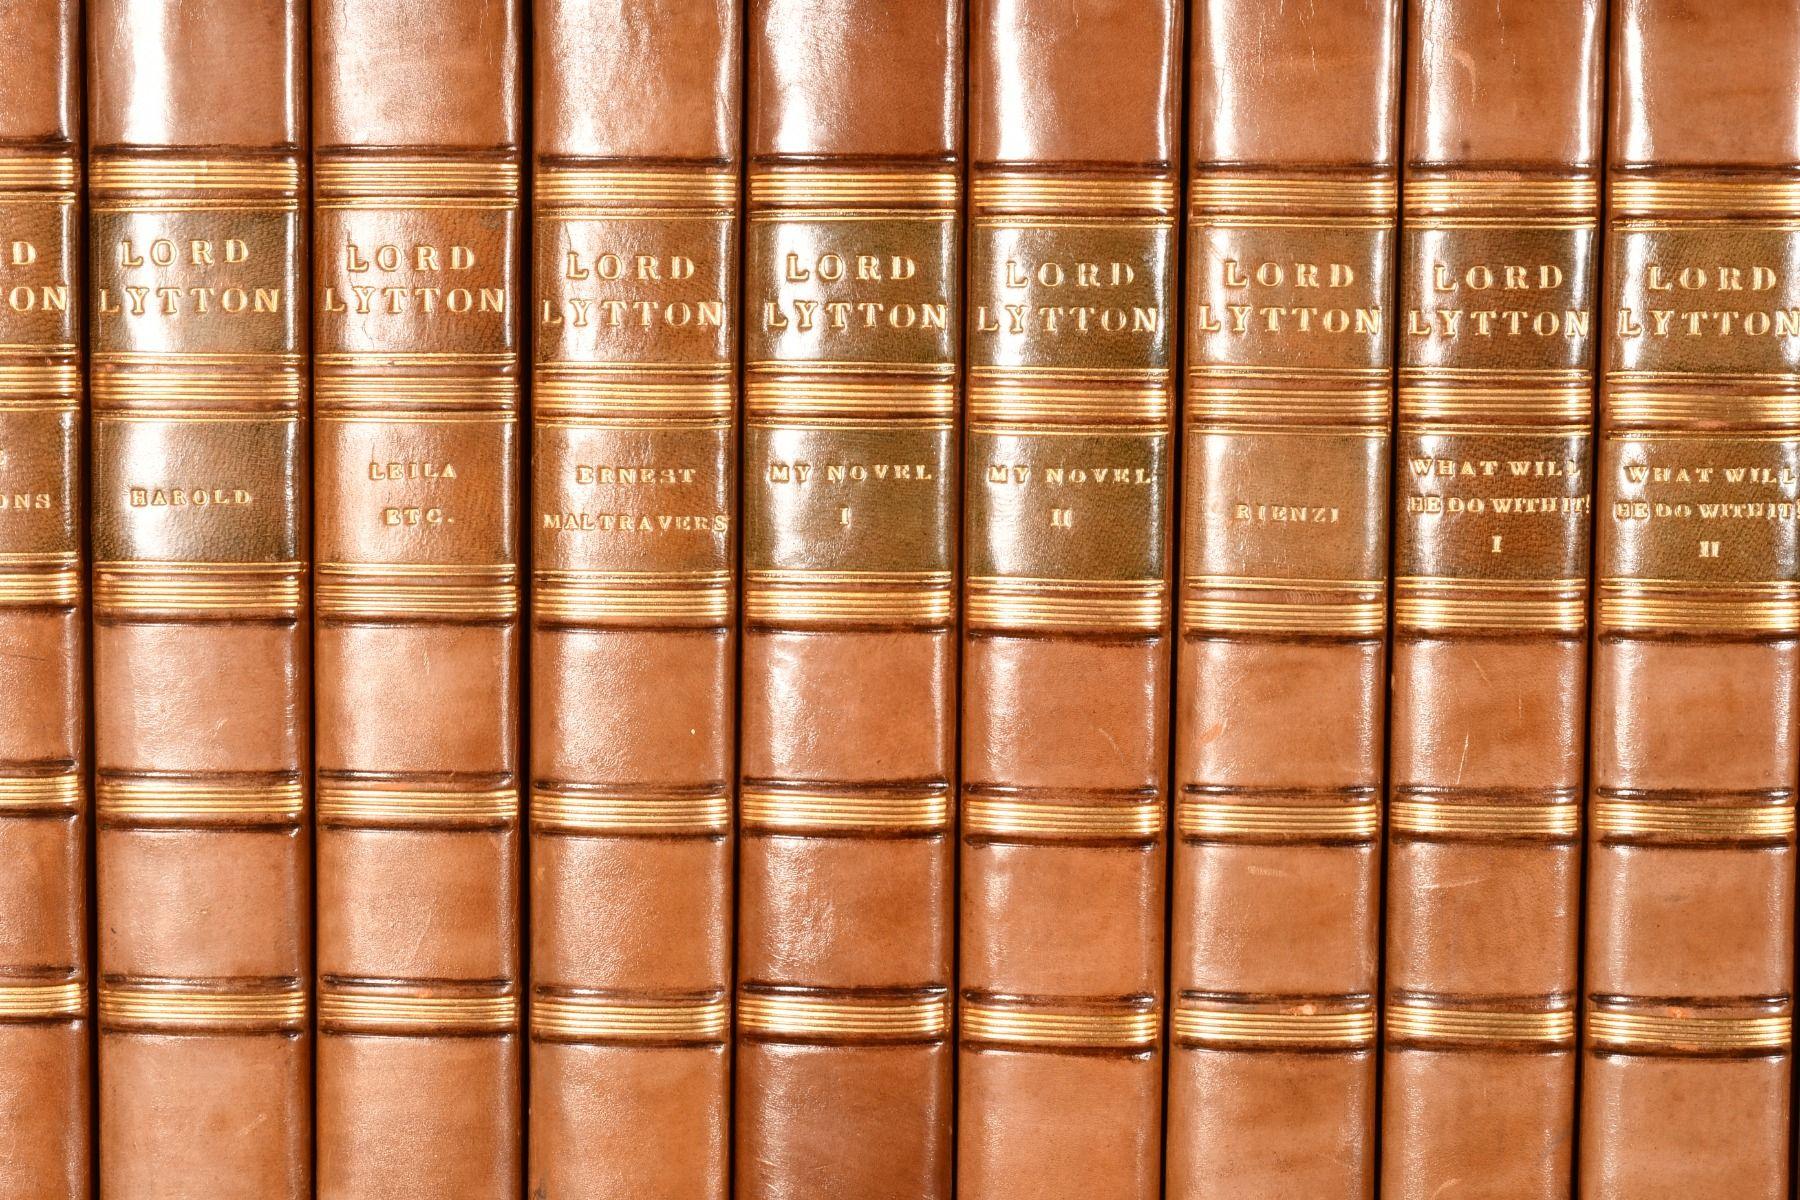 A very pleasing set of thirty-seven volumes in uniform leather bindings of the works of Edward Bulwer-Lytton.

The works of Edward Bulwer-Lytton, a stunning collection in thirty-seven novels handsomely leather-bound in half calf over marbled boards.